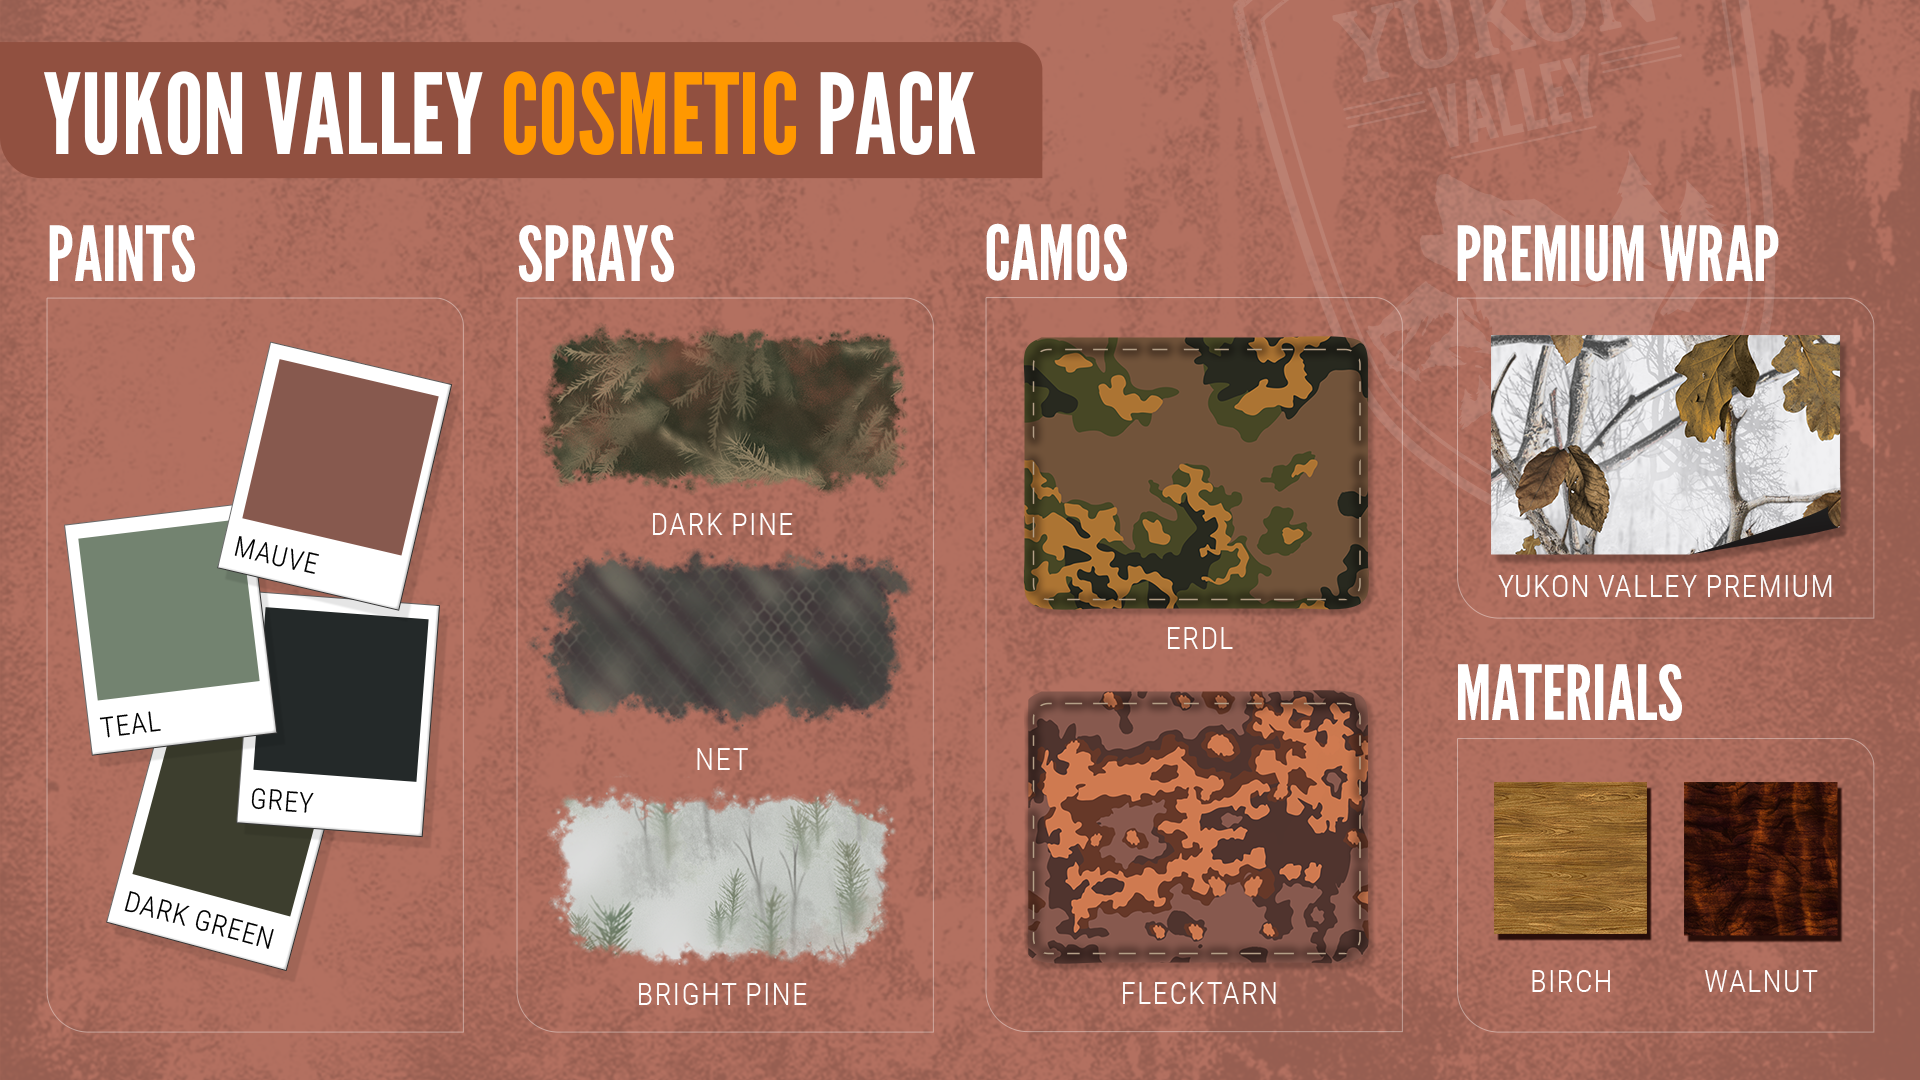 Yukon Valley Cosmetic Pack Infographic